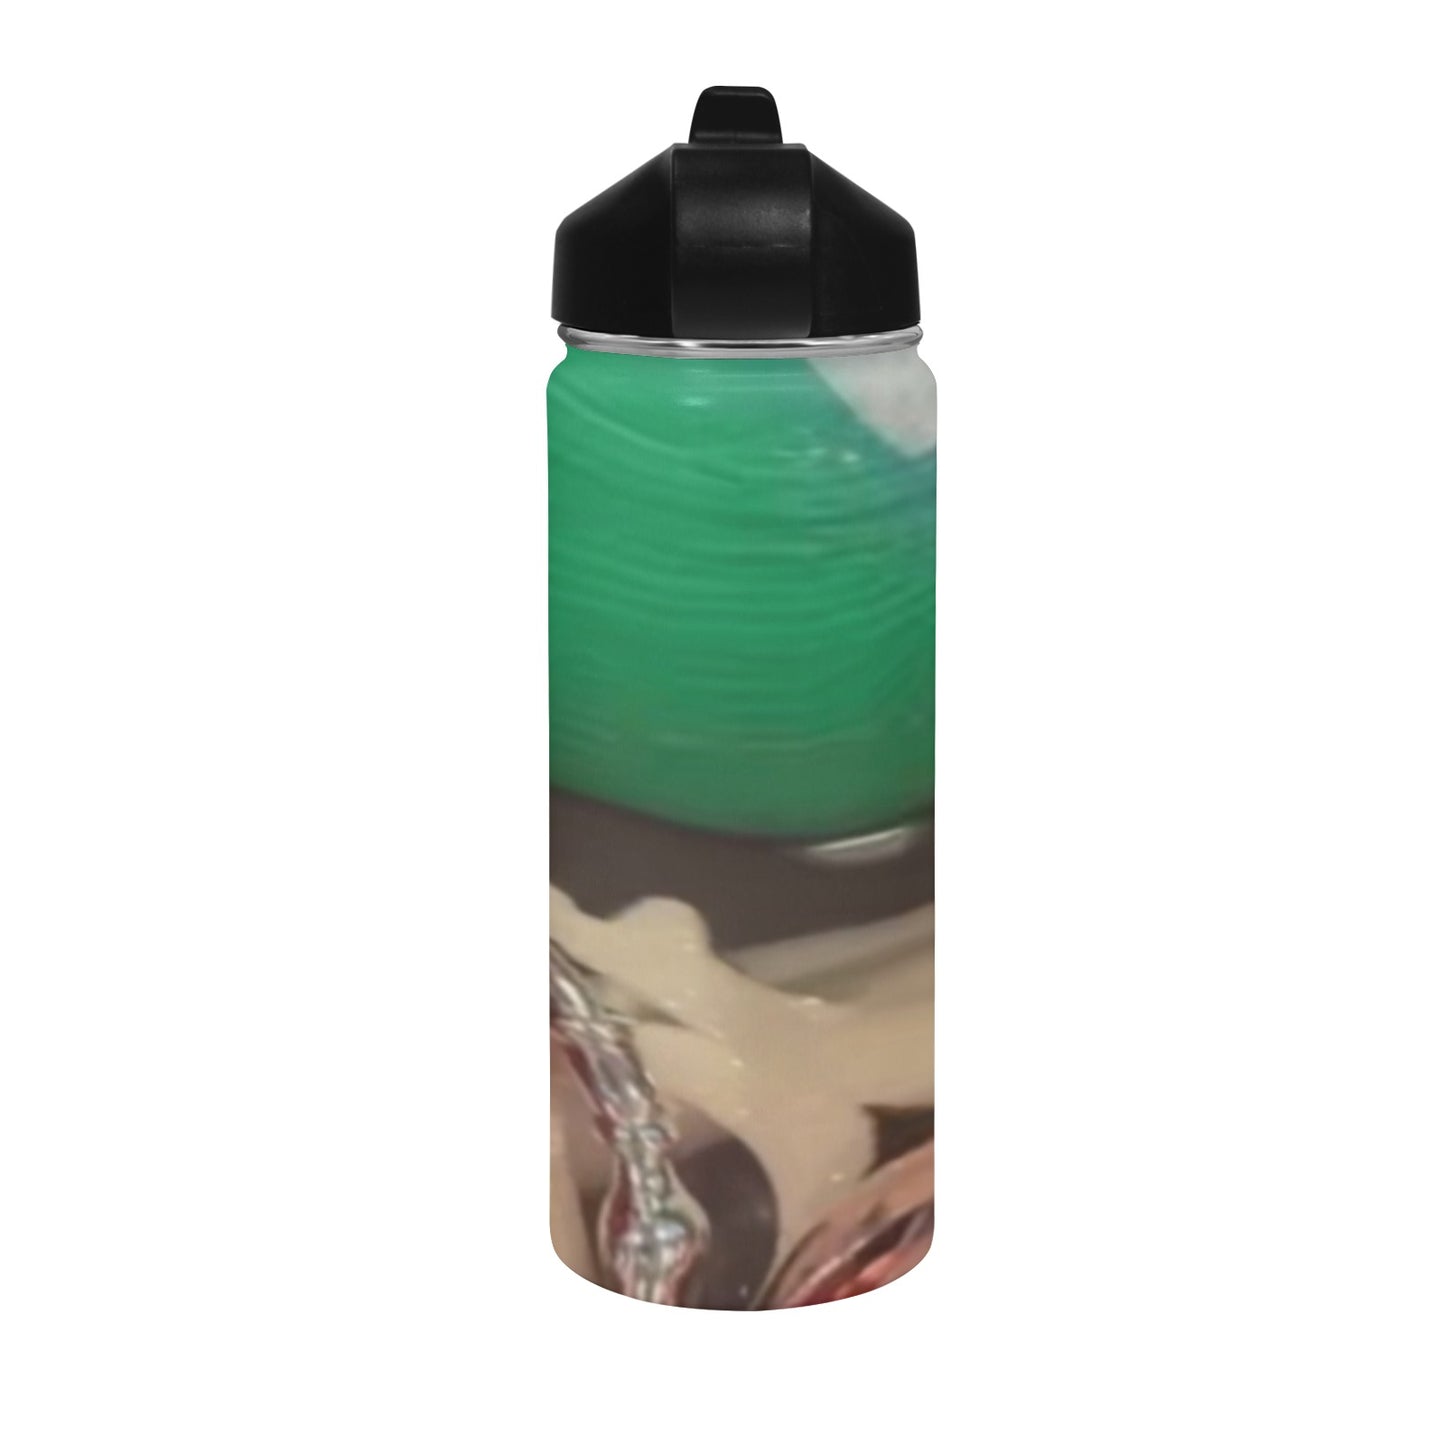 FZ Original Insulated With Straw Lid Water bottle